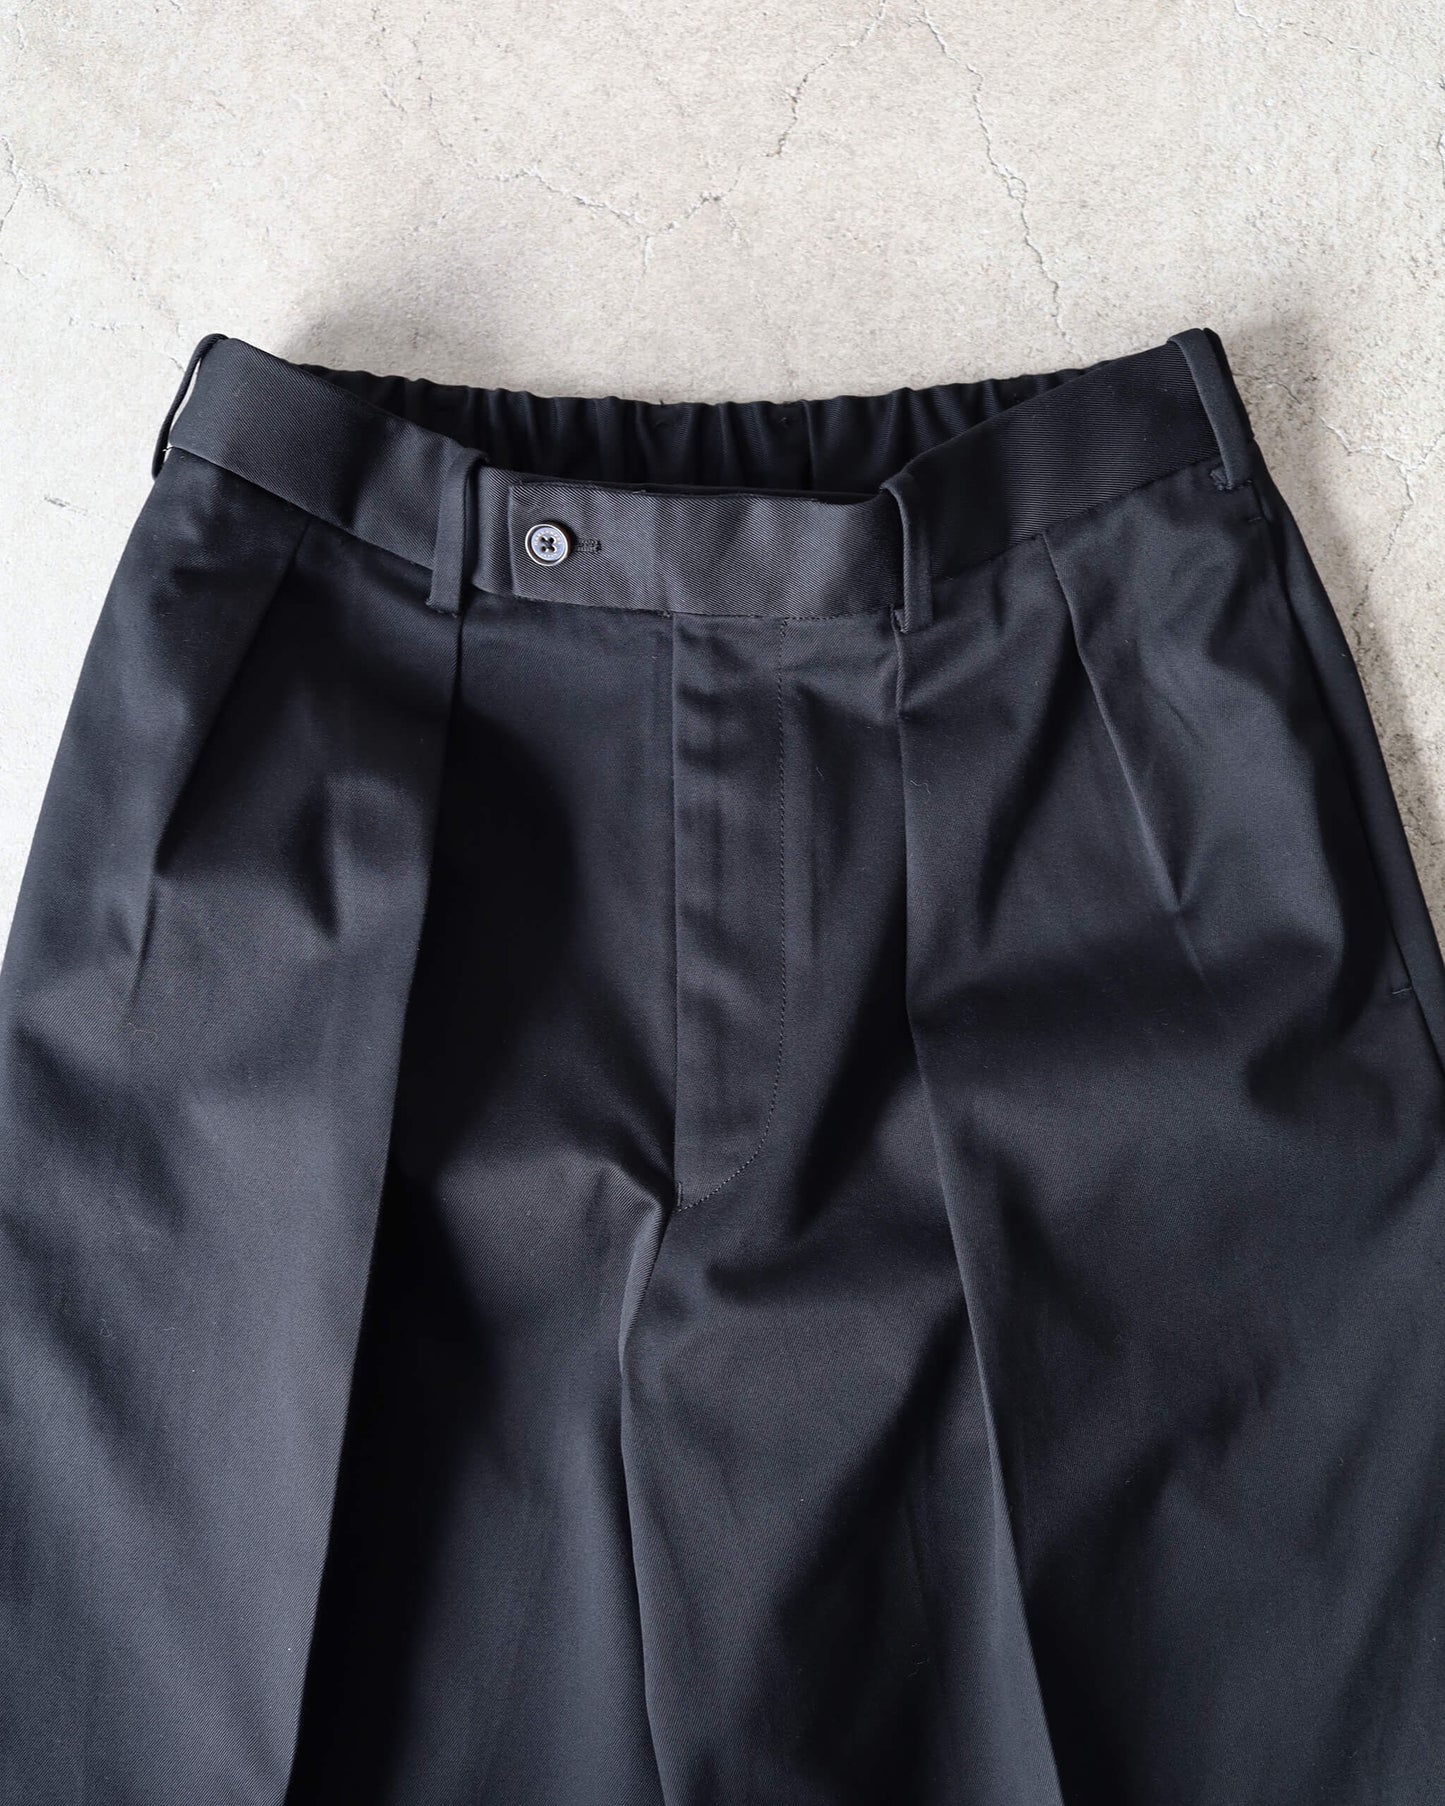 DOUBLE PLEATED TROUSERS ORGANIC COTTON 30/2 TWILL "BLACK"